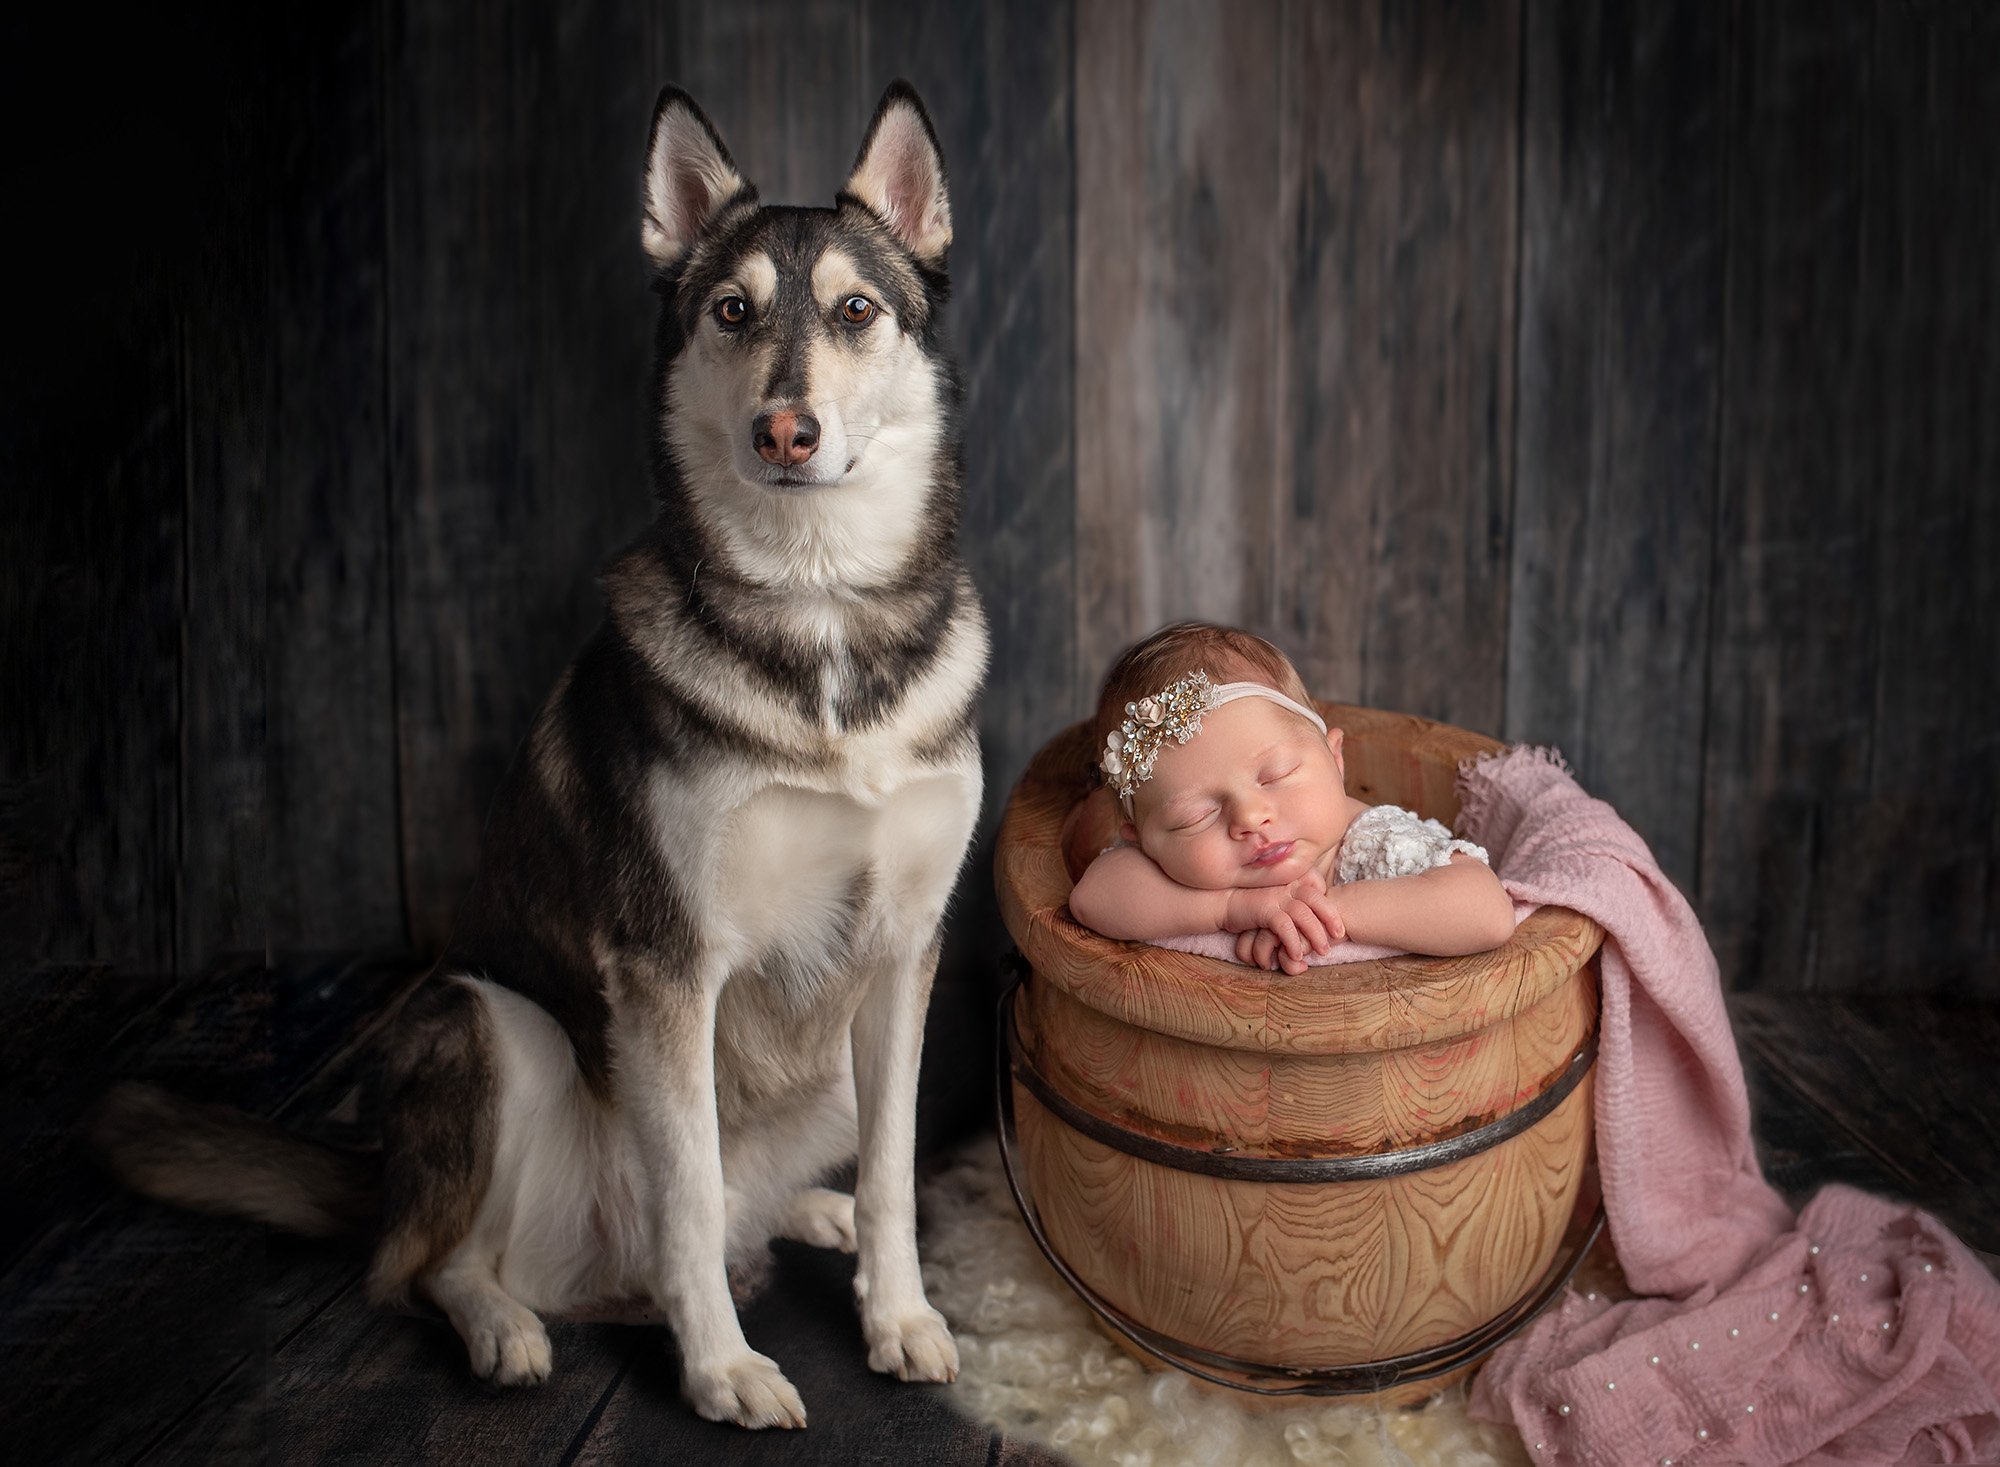 Newborn Photos for a Girl and Her Dog